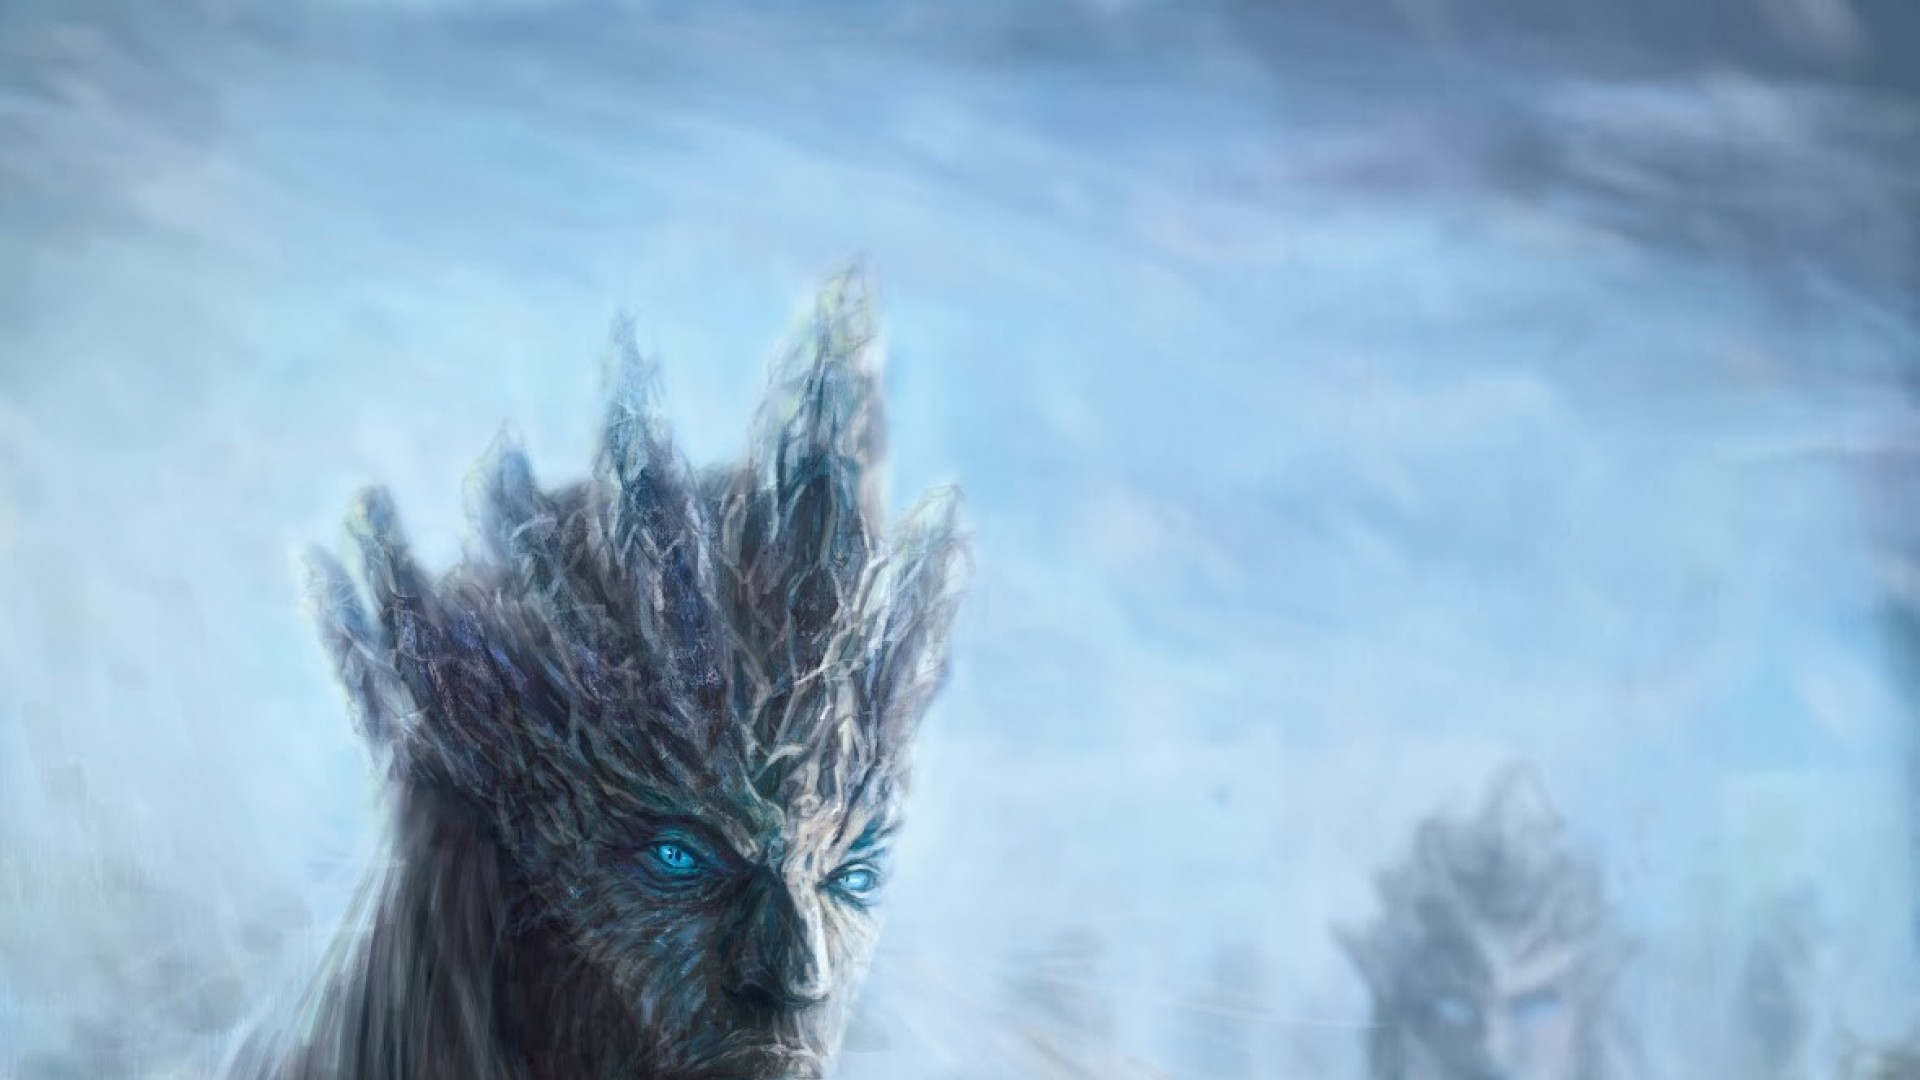 Game Of Thrones 1080p Wallpaper High Definition Quality